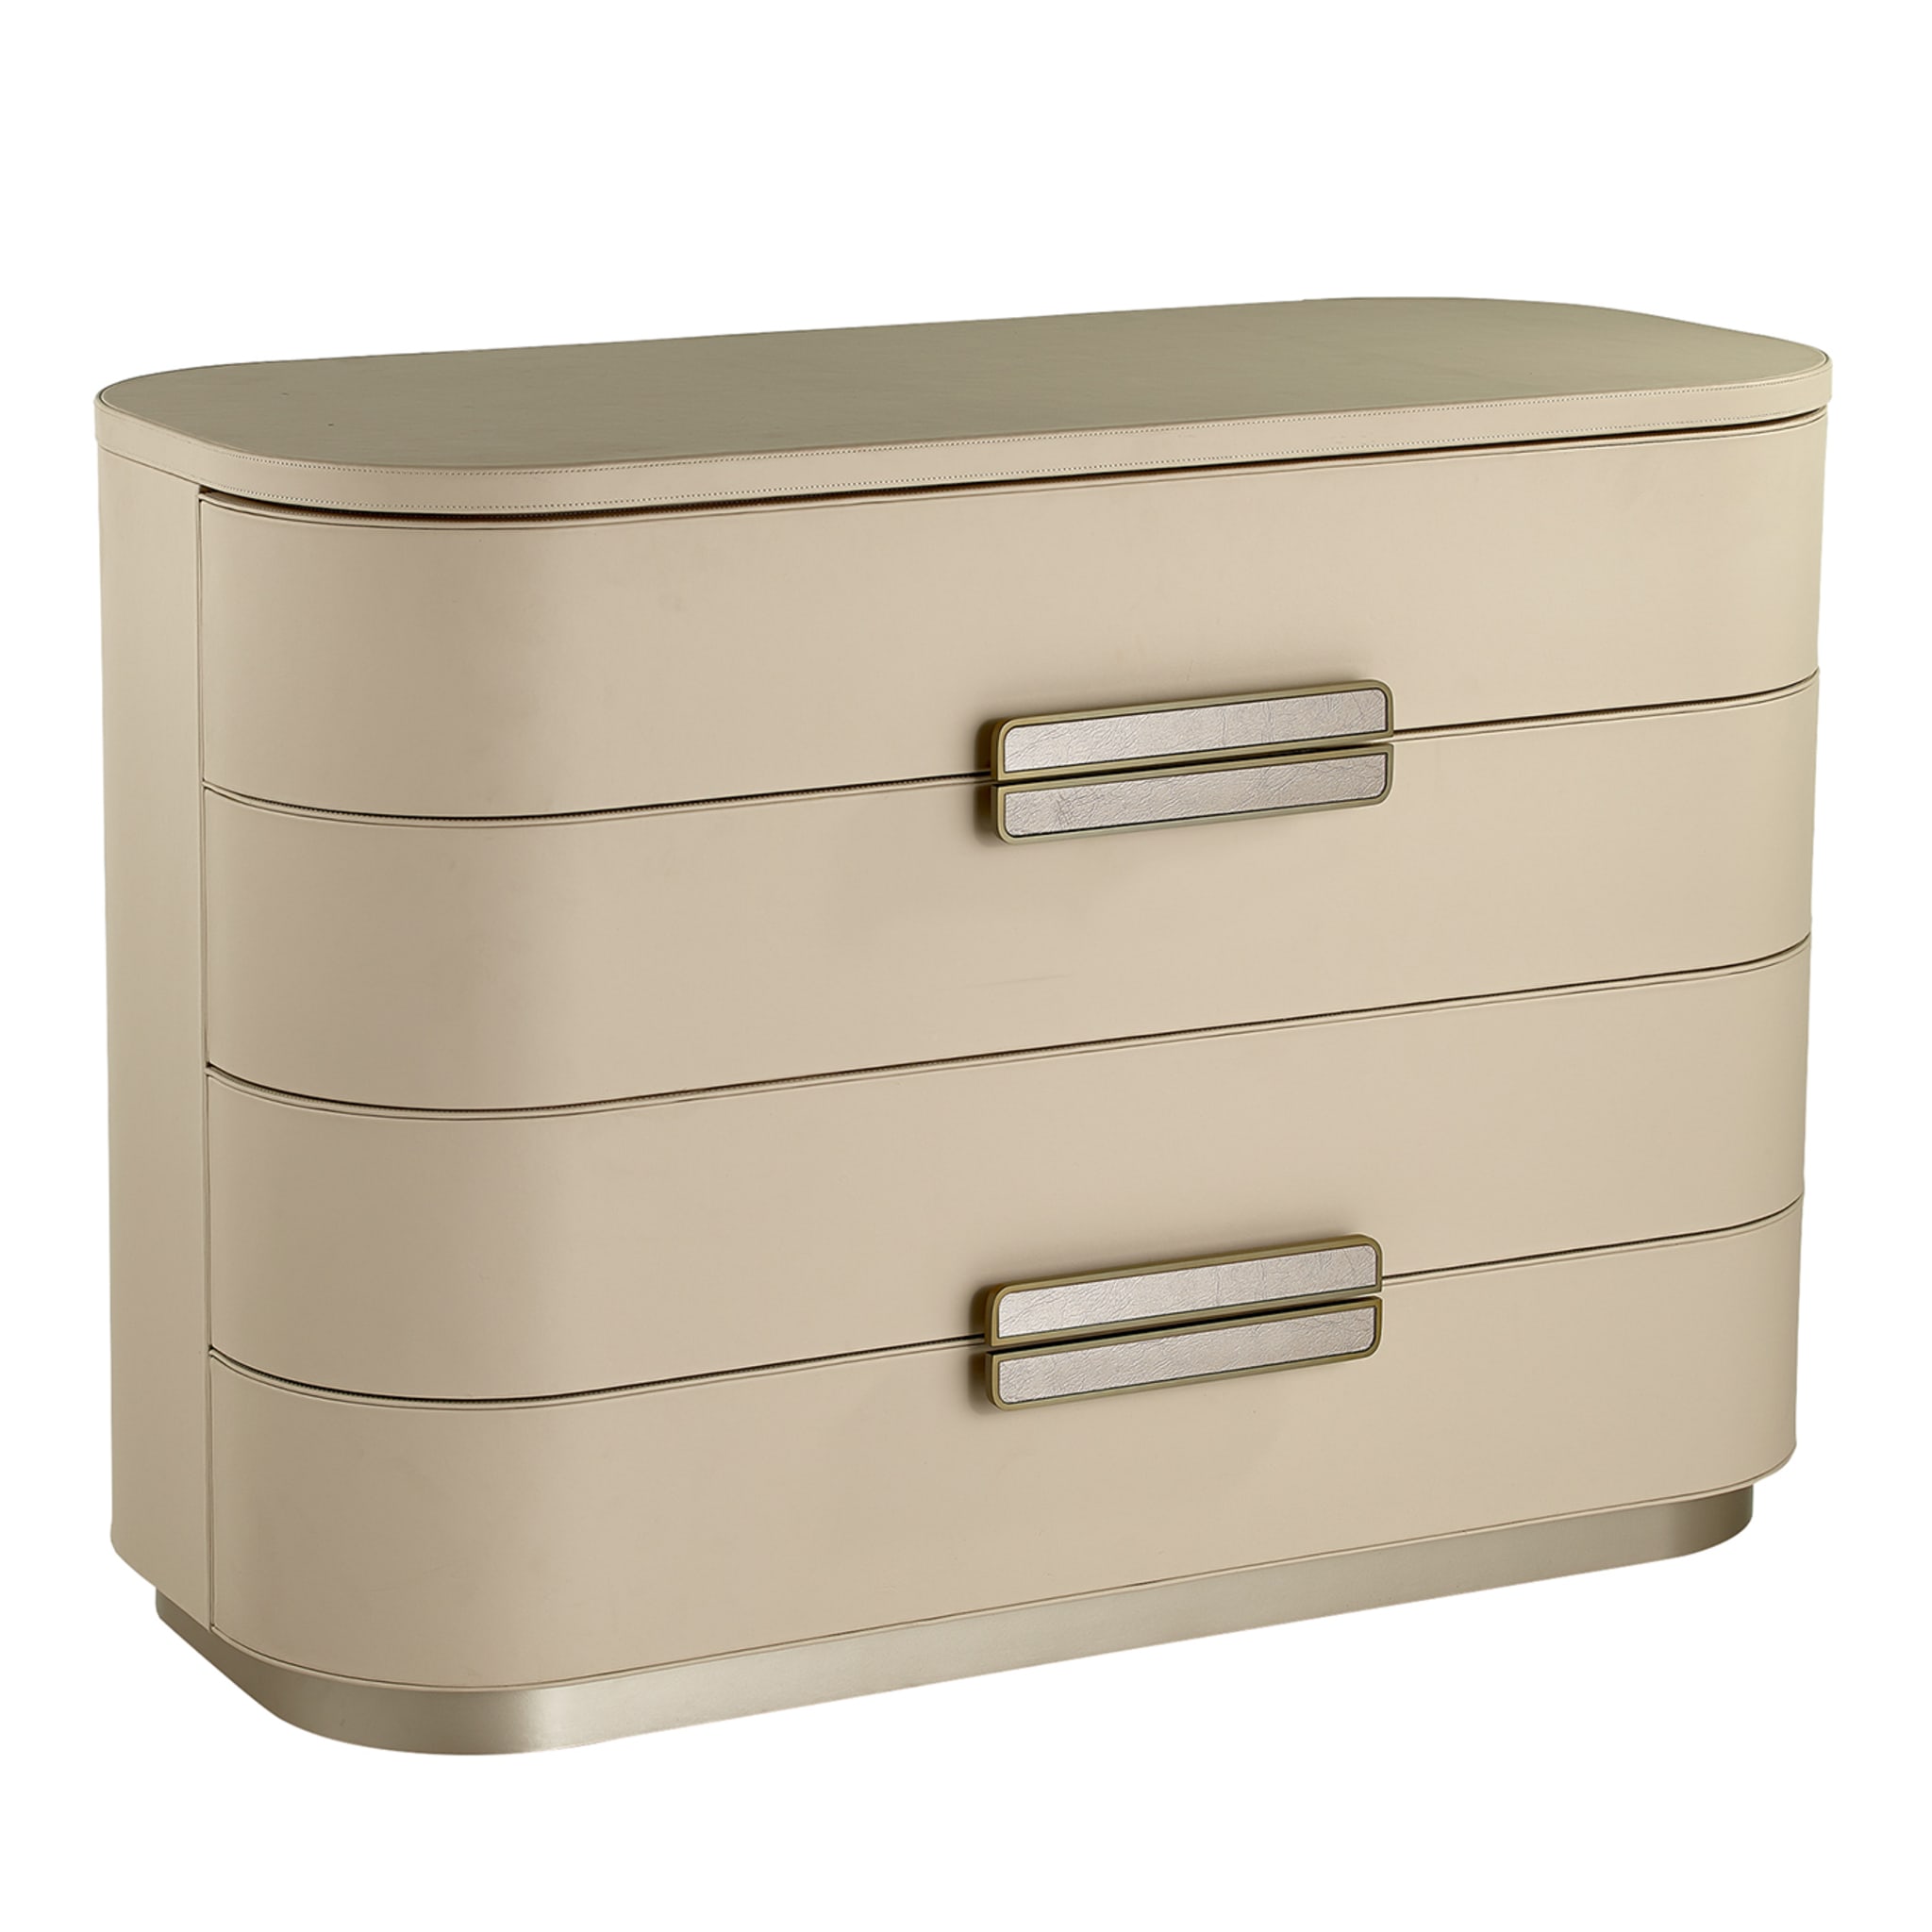 Amidele Chest of Drawers - Main view